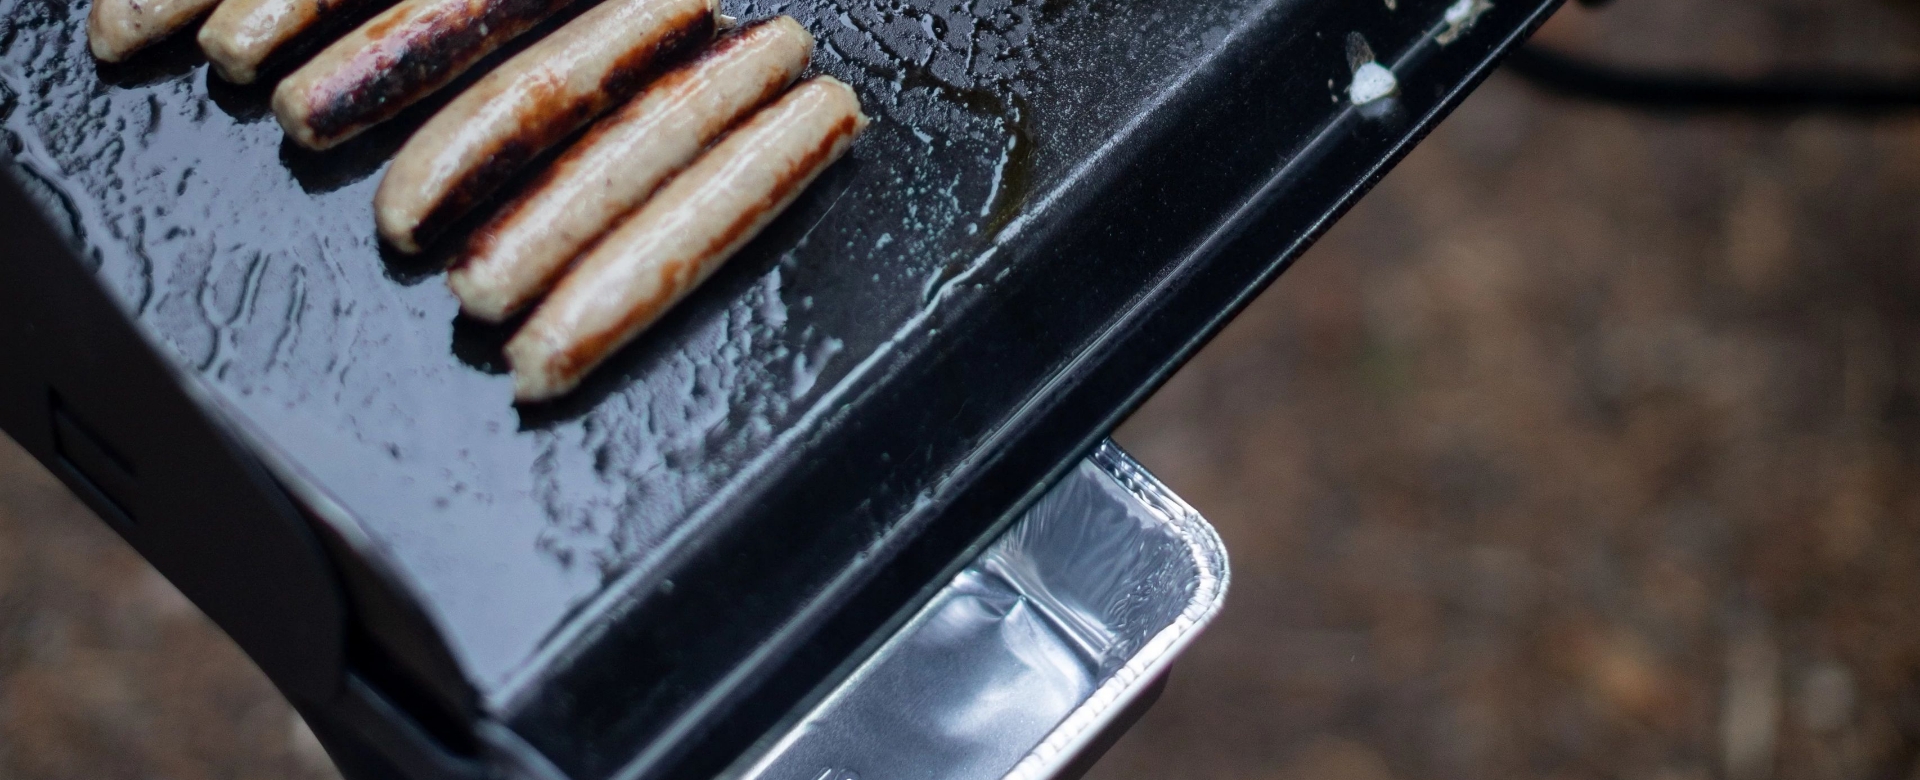 How to Care for Your Griddle